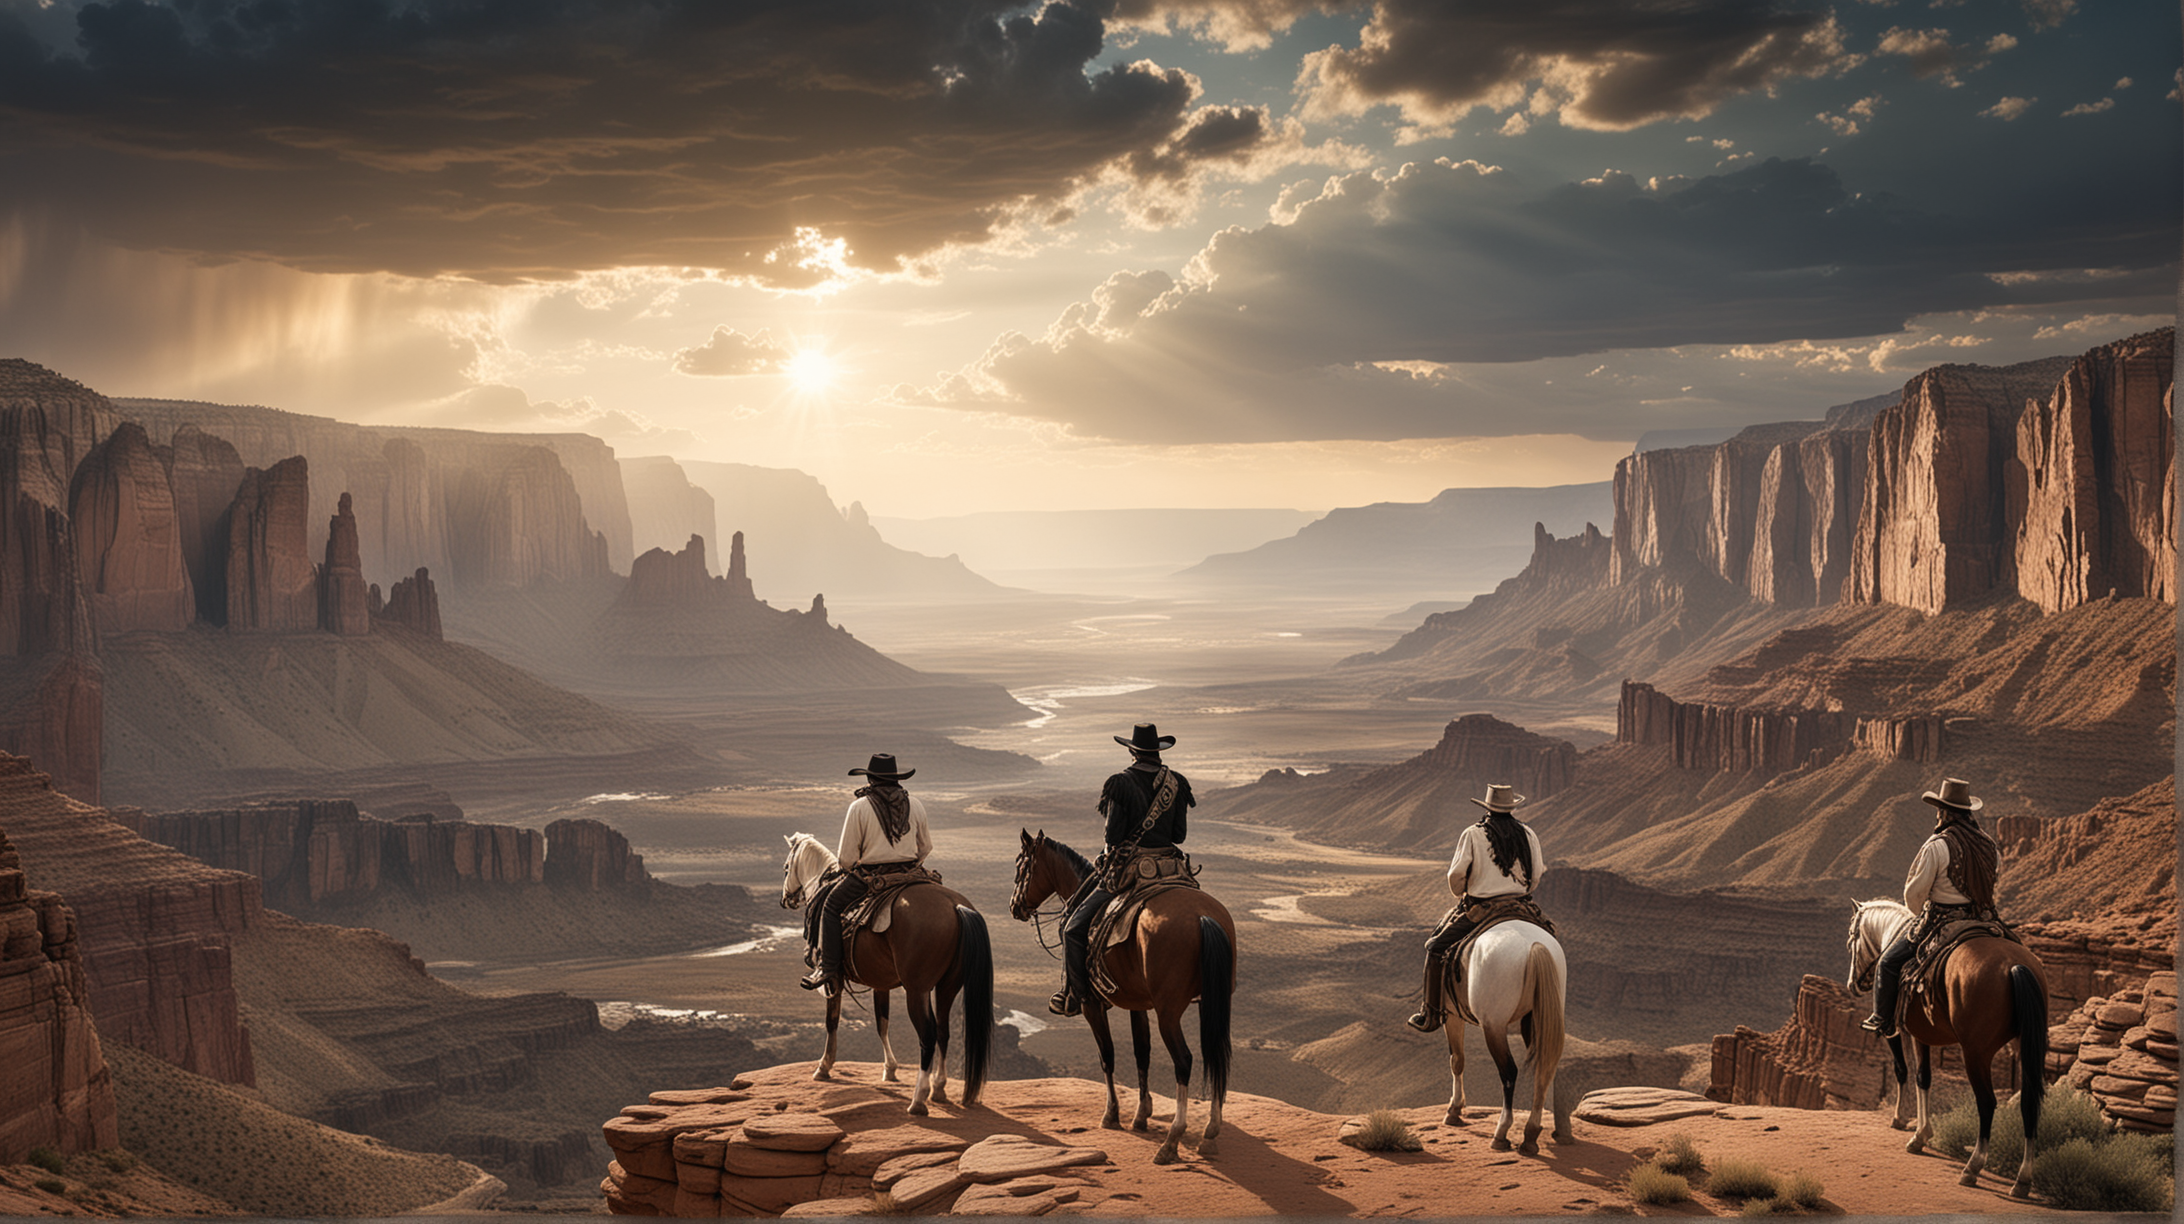 Lone Ranger and Tonto on Cliff Overlooking Vast Western Landscape